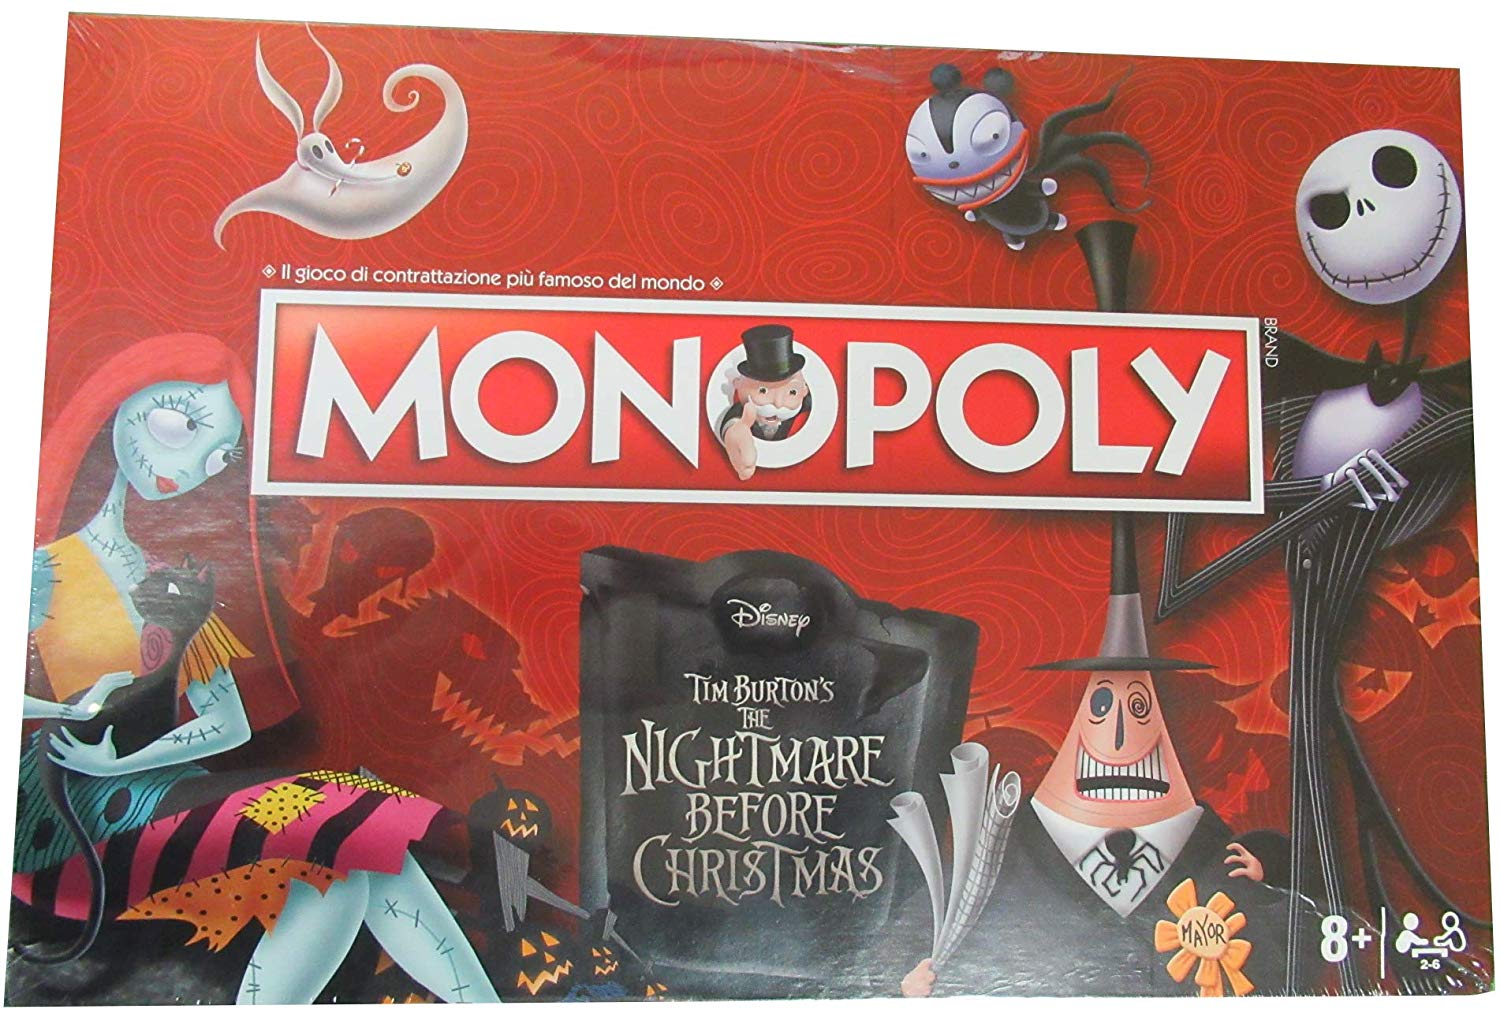 Nightmare Before Christmas (The): Monopoly - Italy